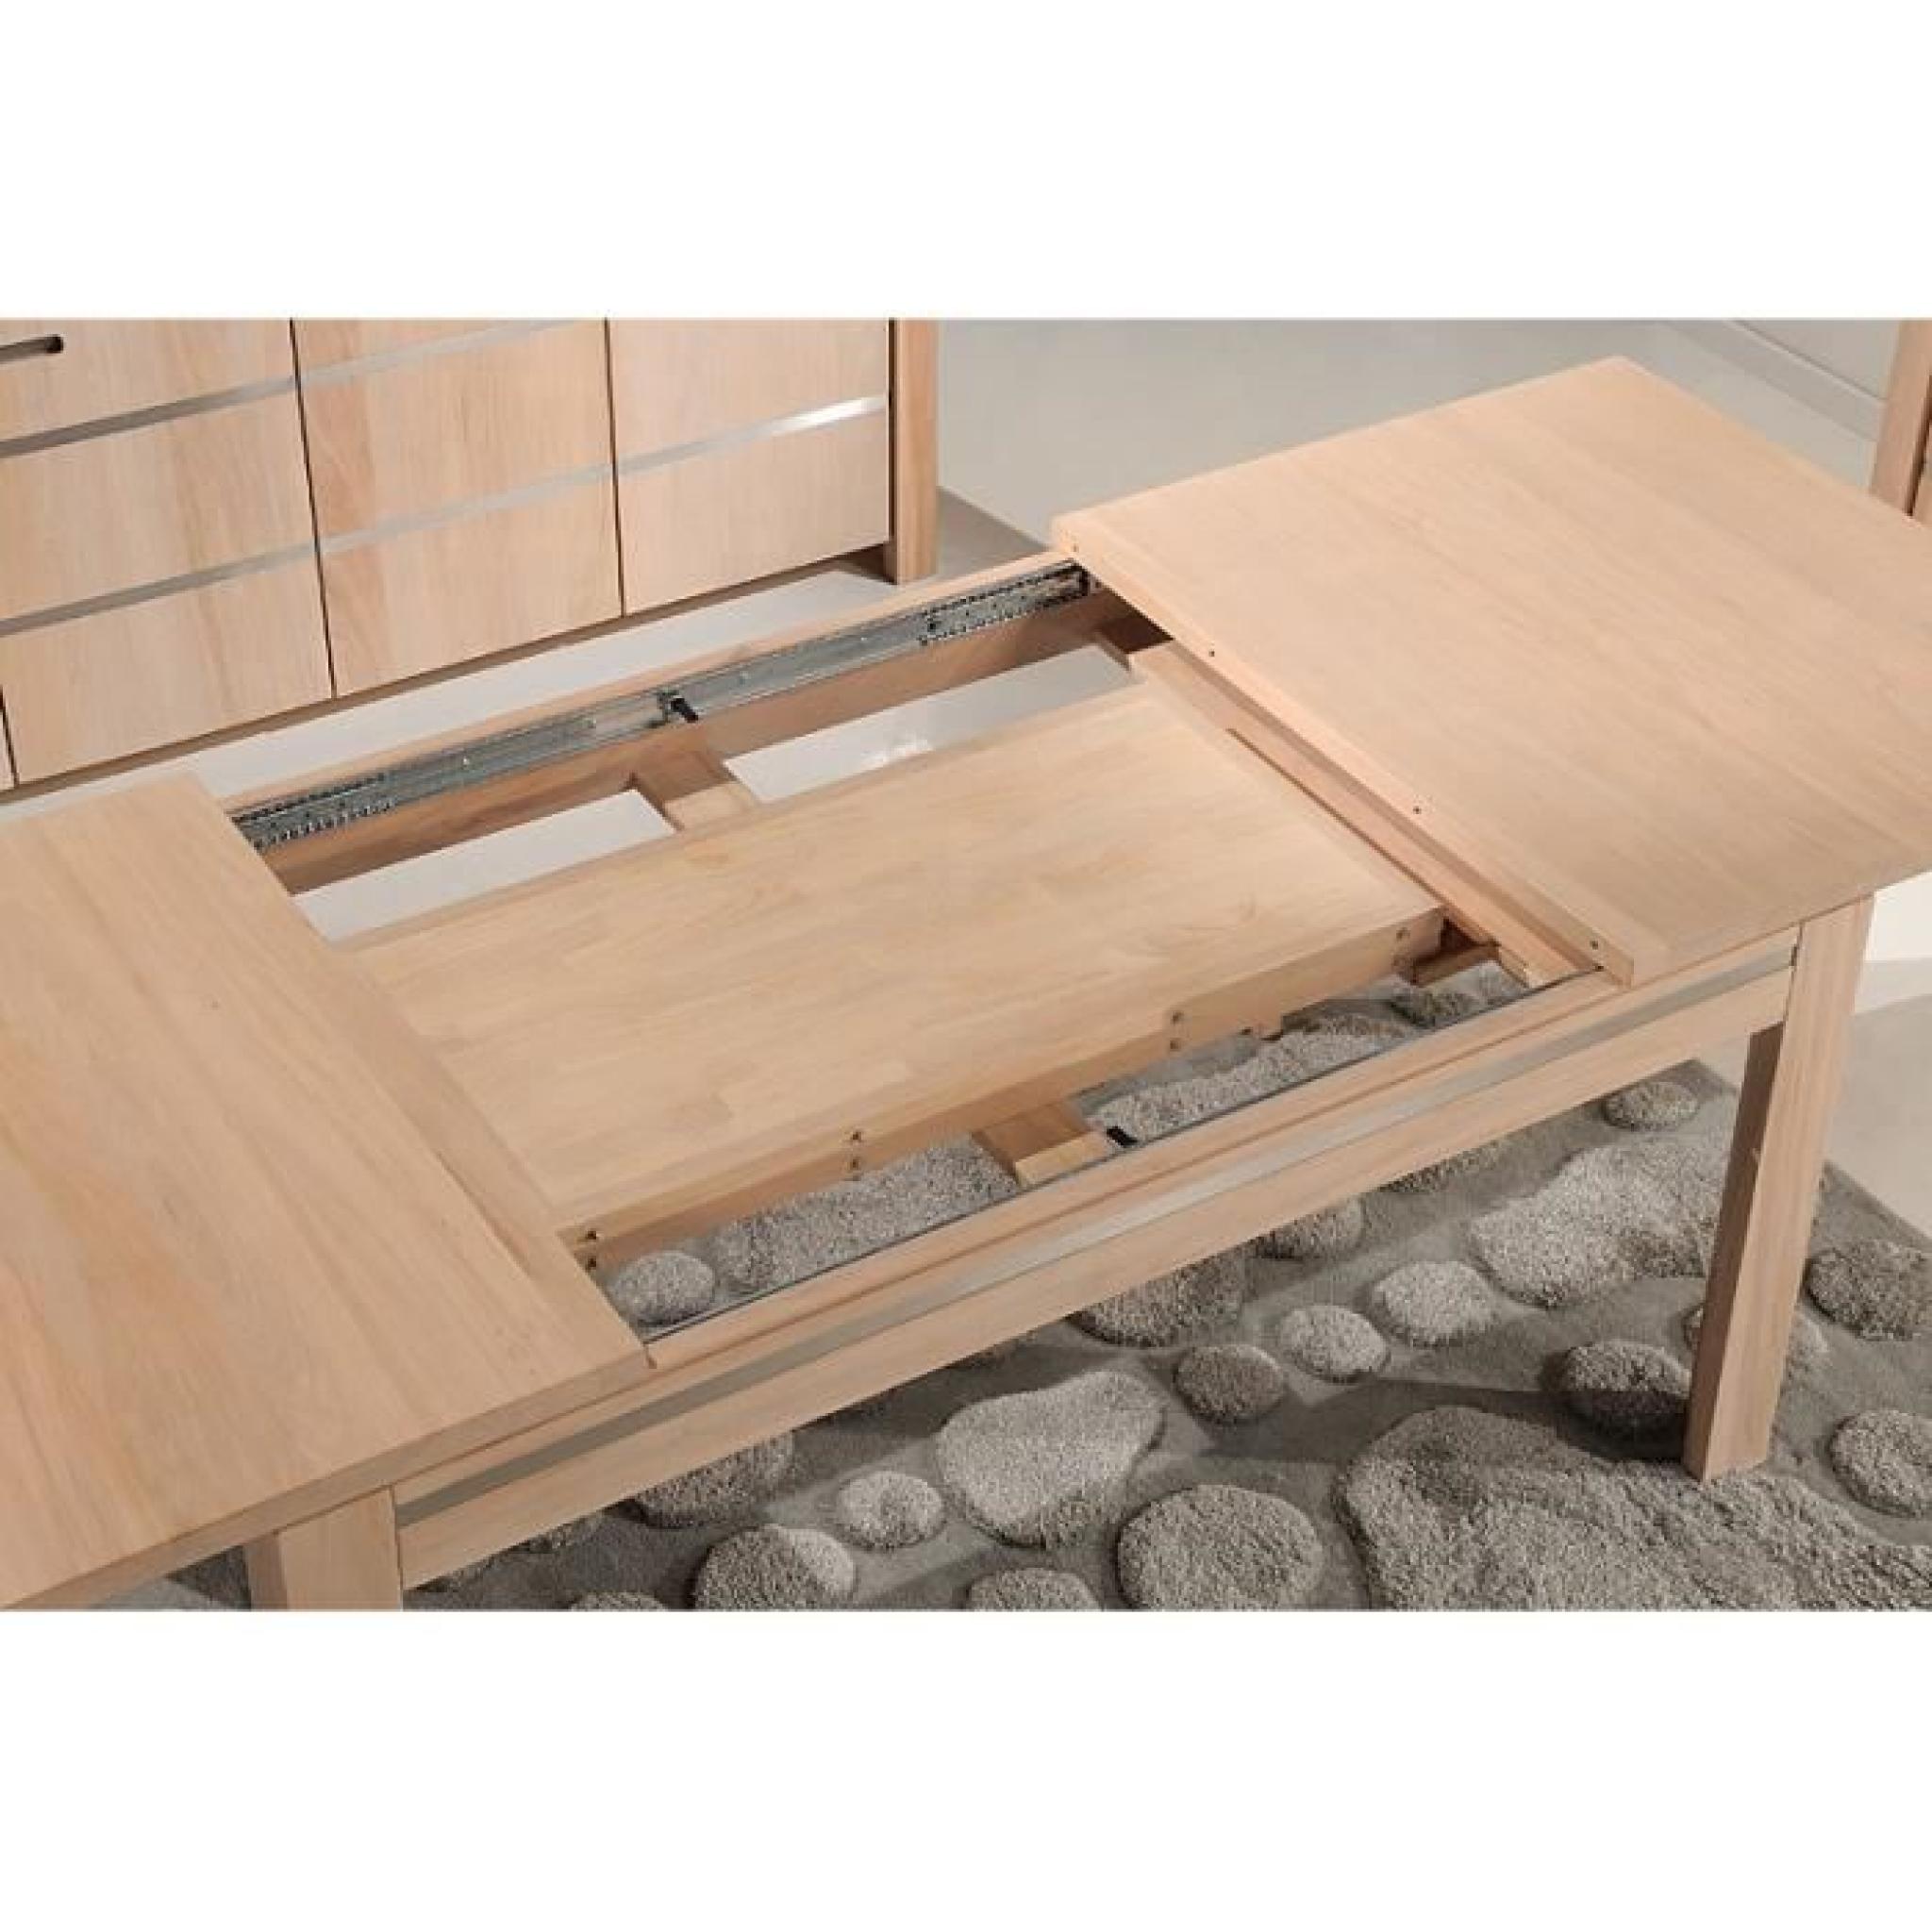 Table OPALE 180/95 ORME MASSIF-INOX (Orme - Naturel) pas cher